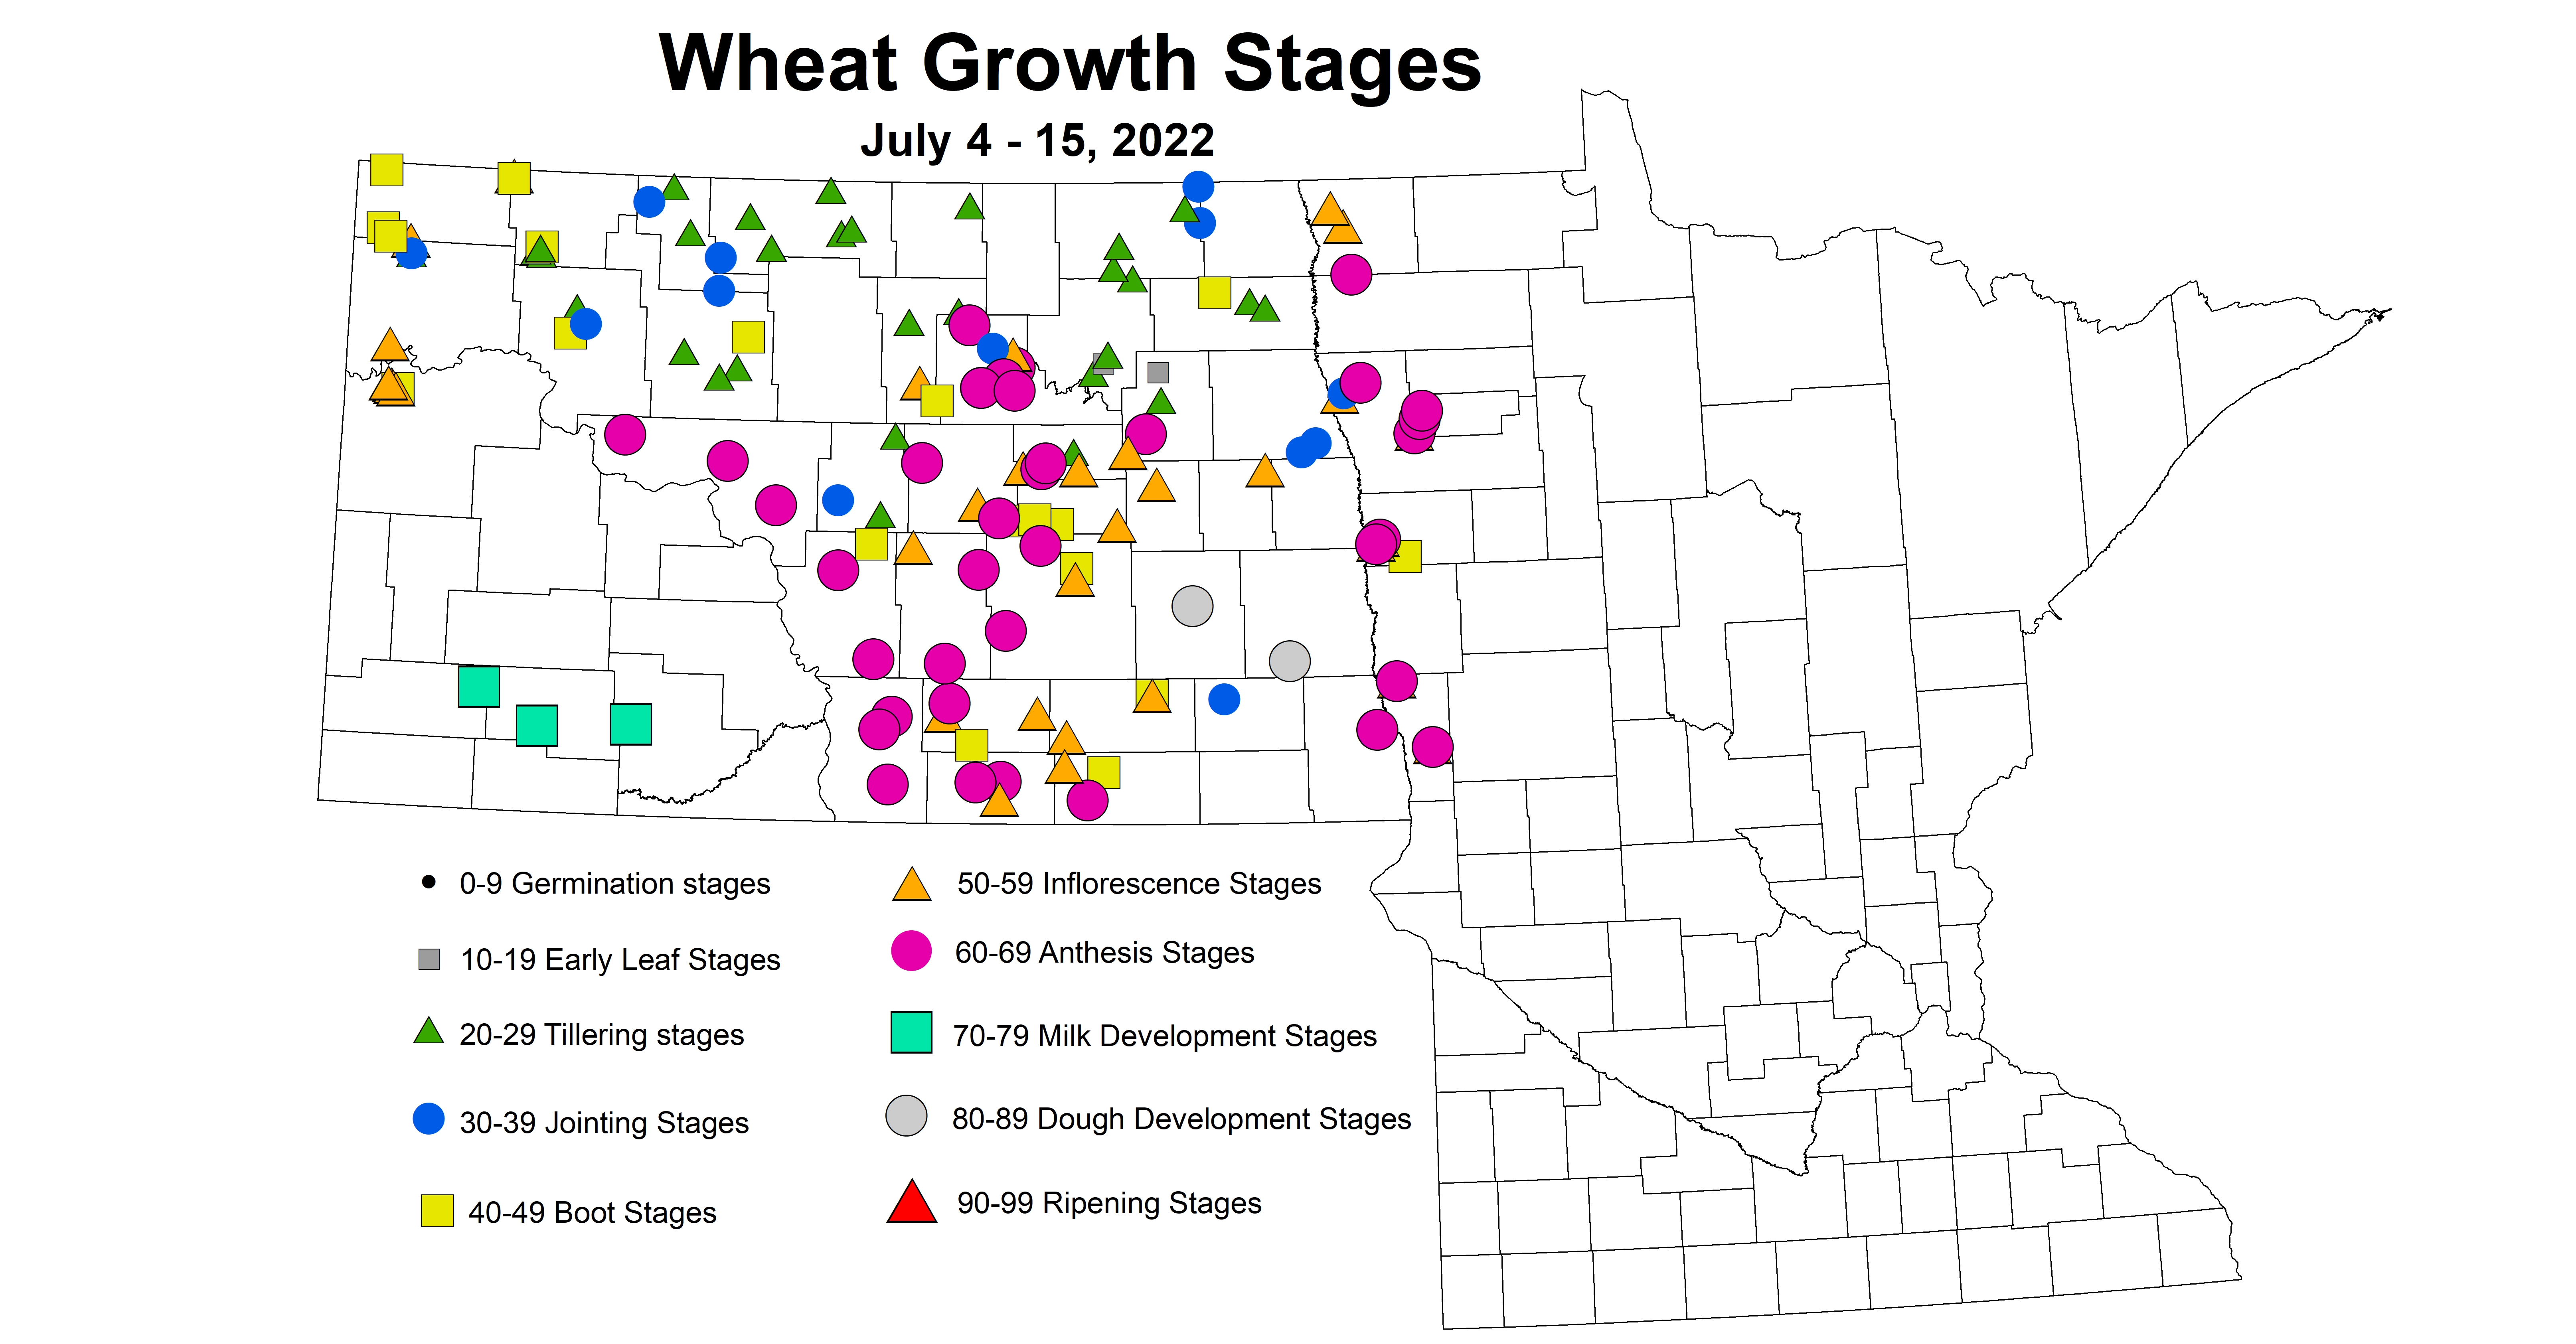 wheat growth stages 2022 7.4-7.15